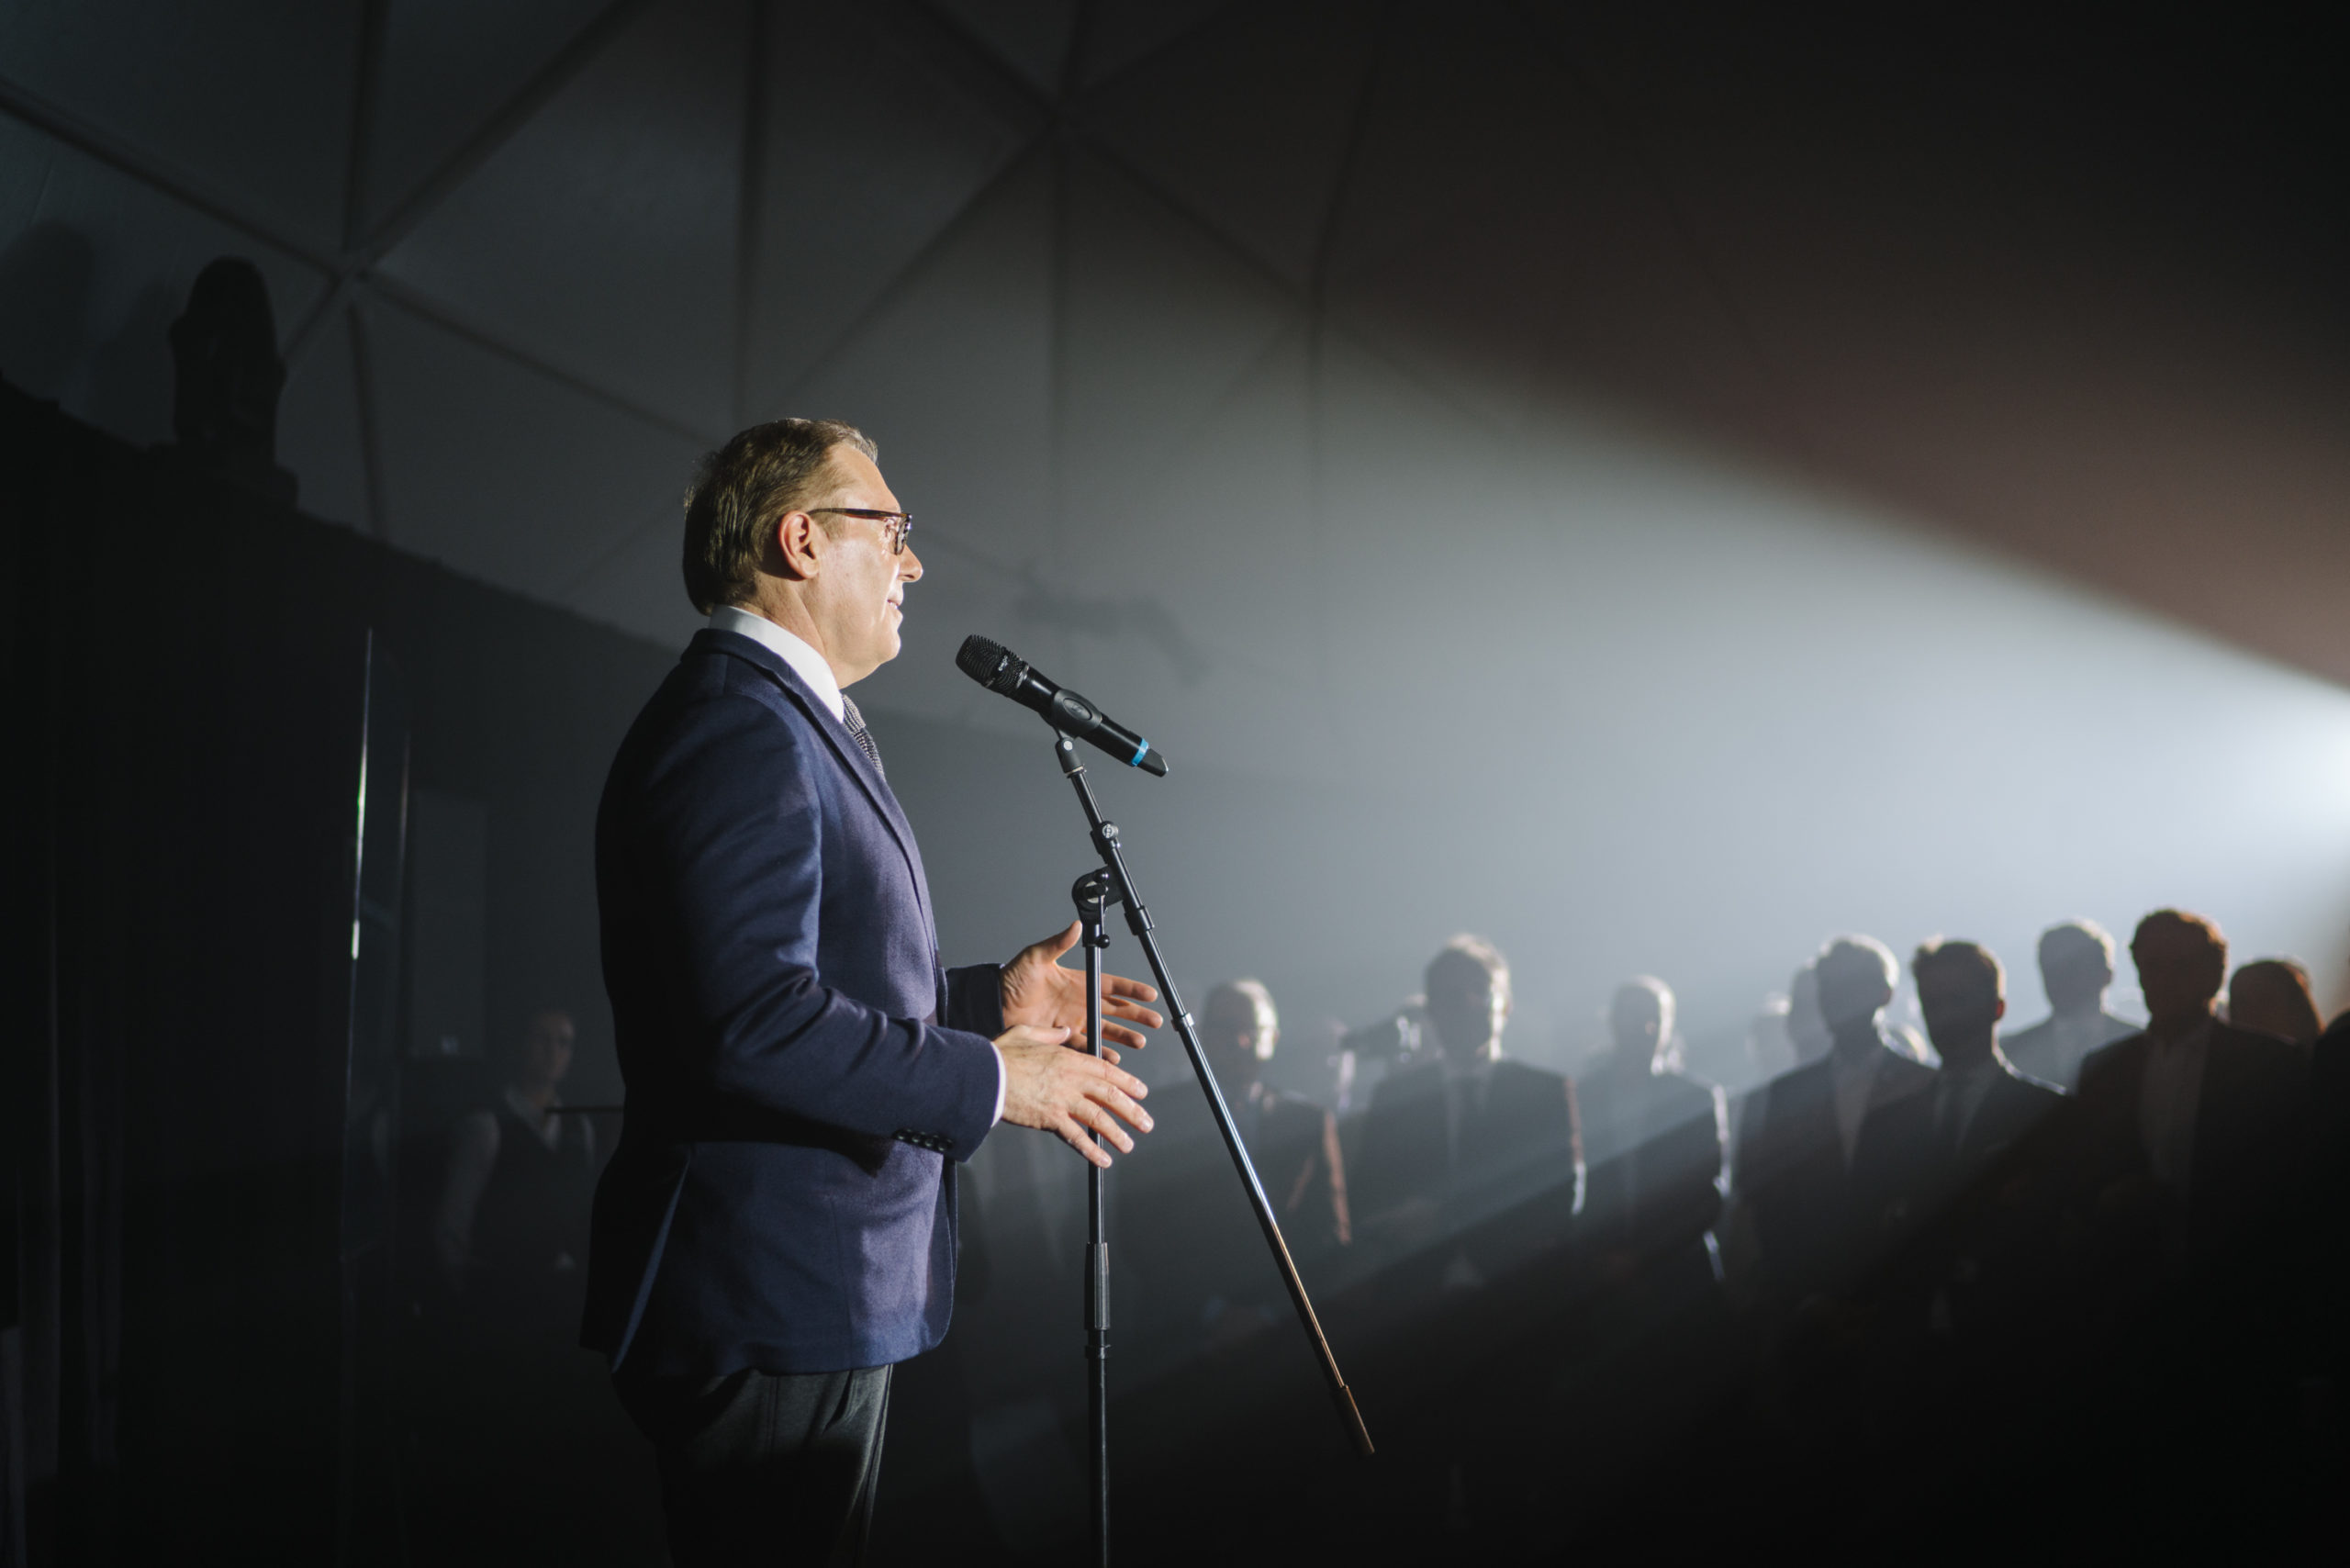 Shine a light event agency Luxembourg - Creates immersives experiences - Foundation Stone Laying Infinity - Speech